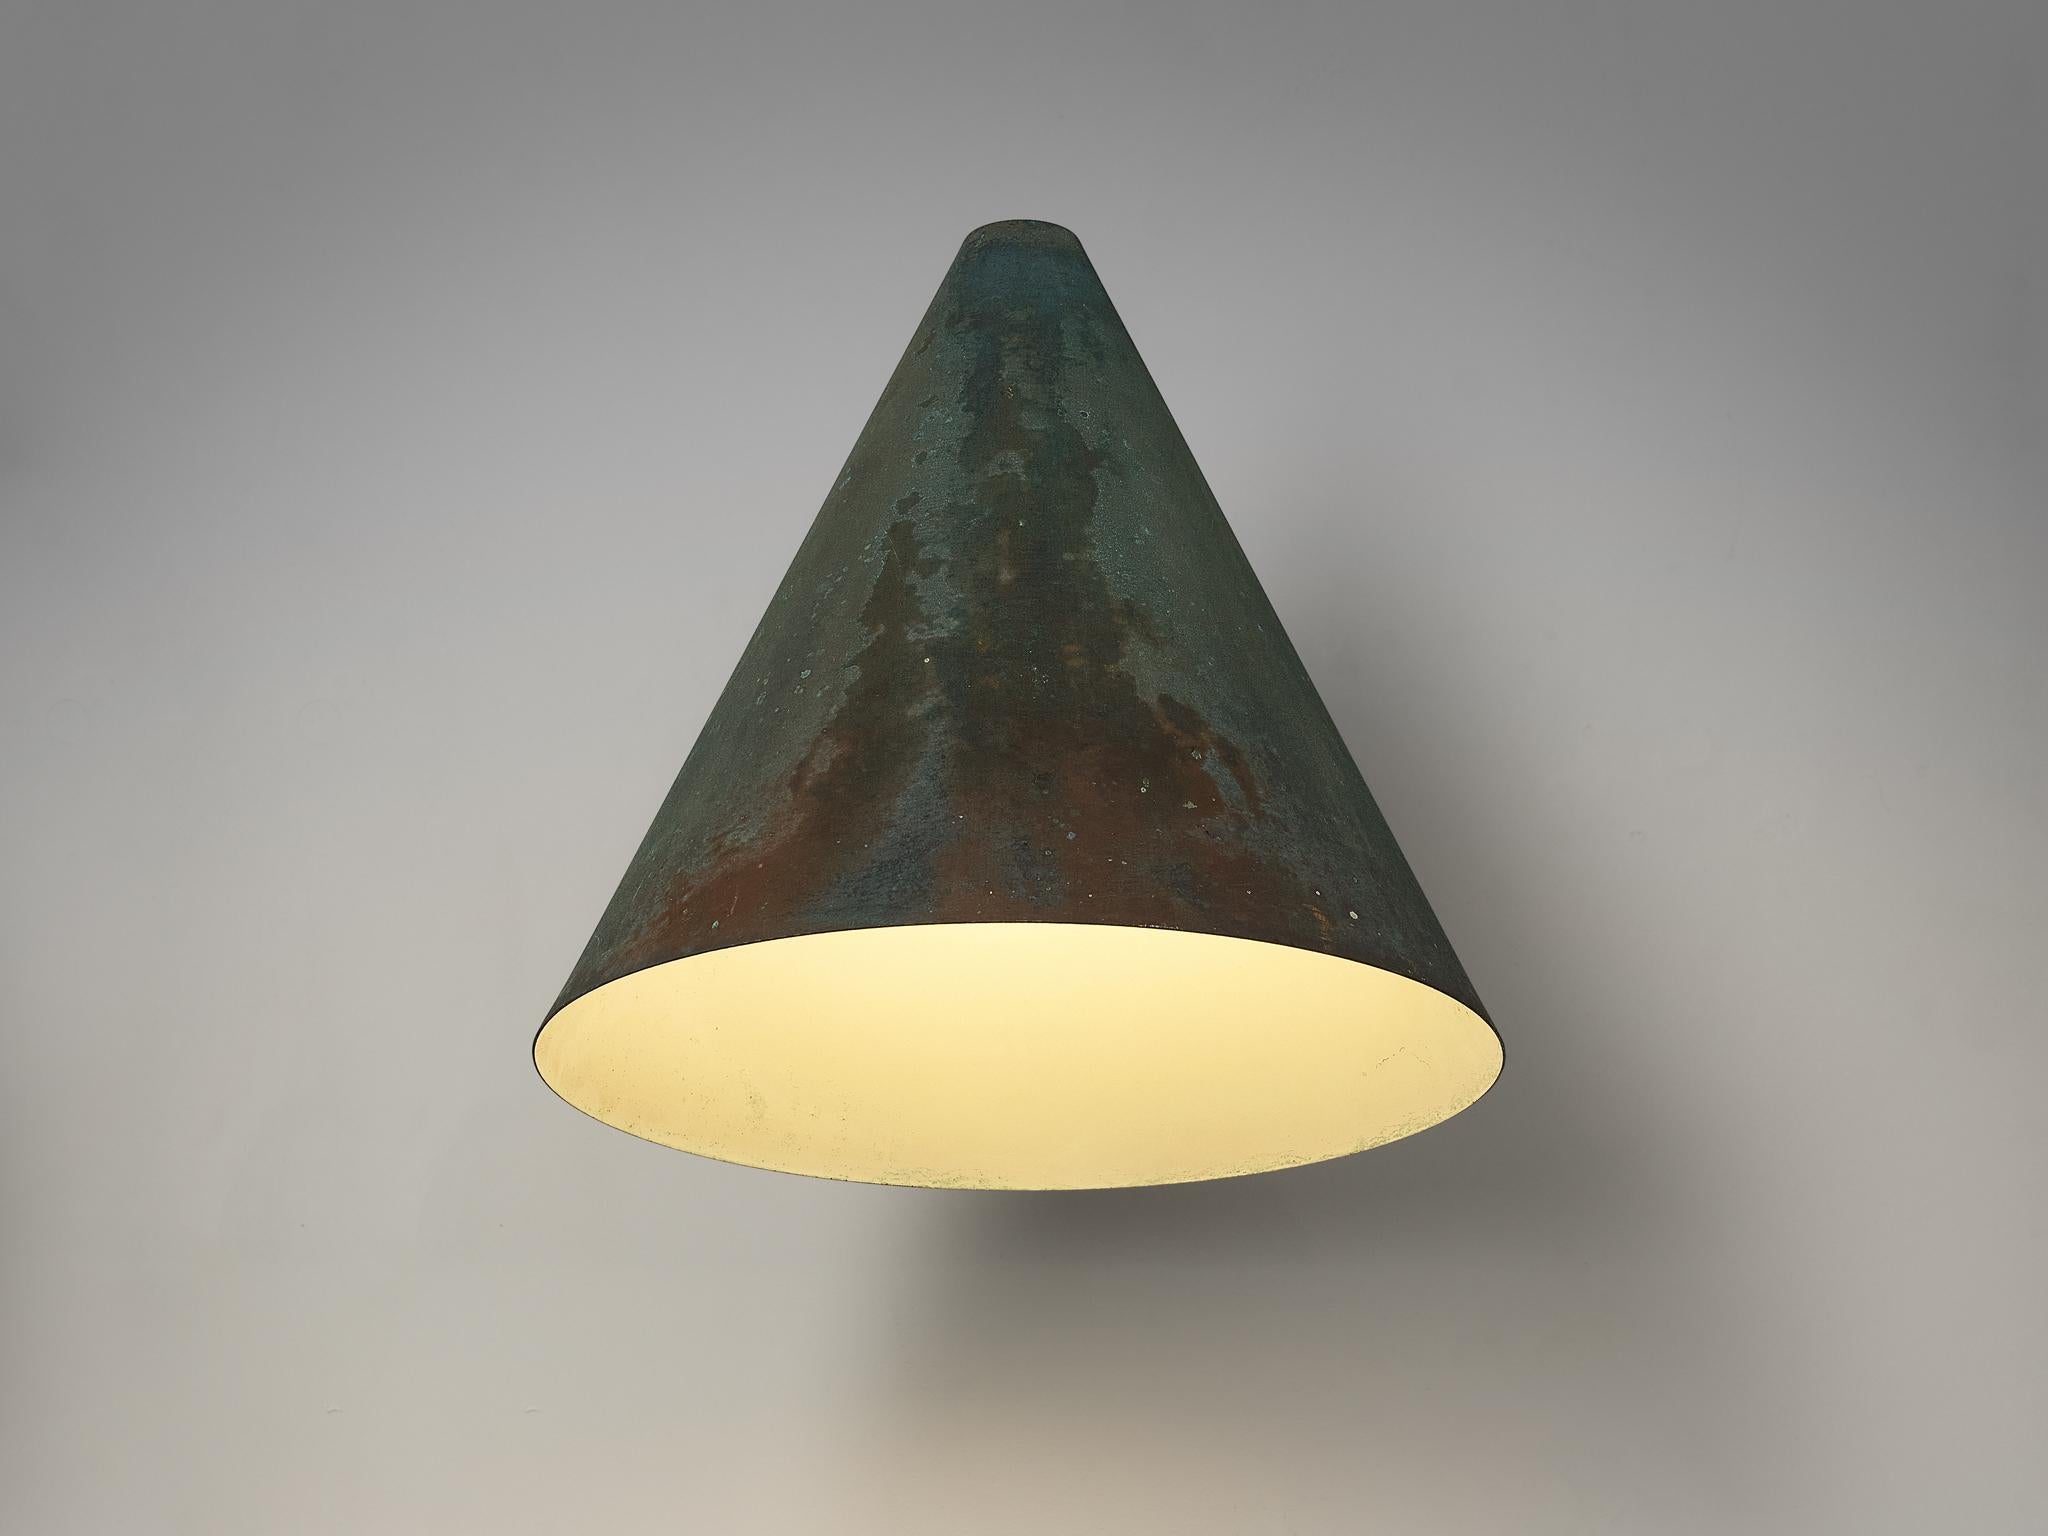  Hans-Agne Jakobsson 'Tratten' Wall Lights in Patinated Copper  For Sale 3